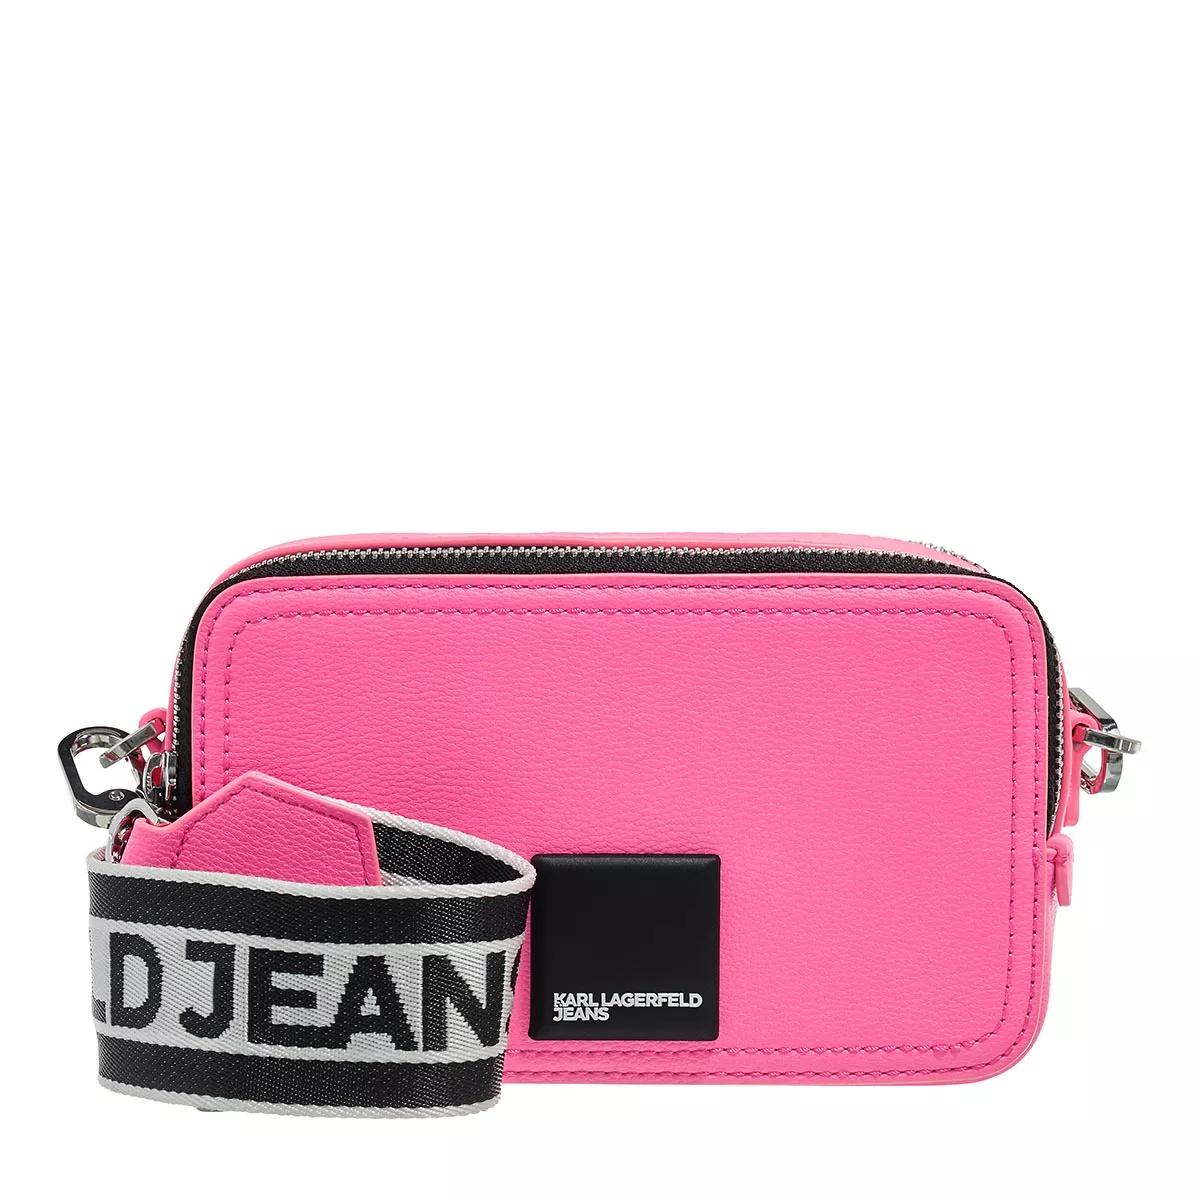 Karl Lagerfeld Jeans Tech Leather Camera Bag Patch J139 Shocking Pink ...